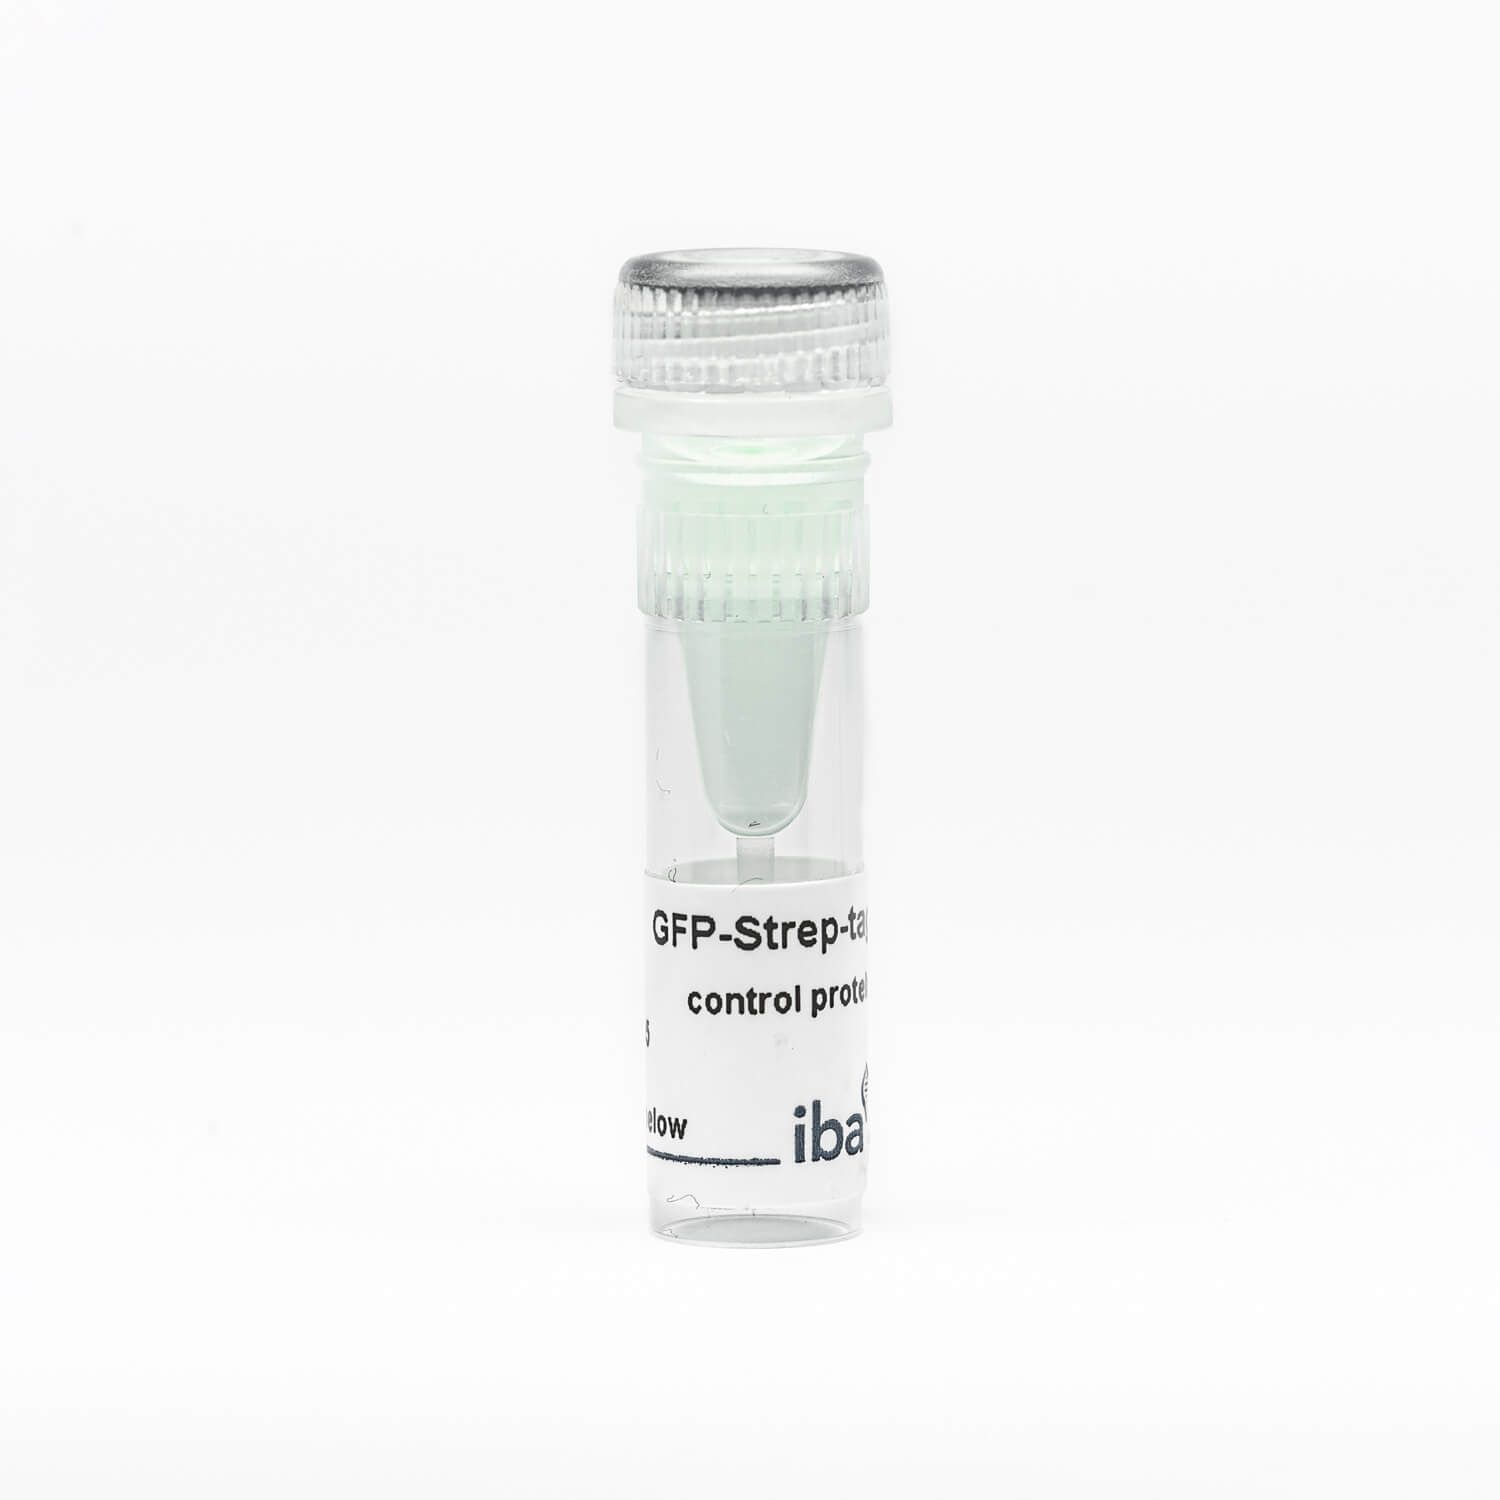 GFP-Strep-tag control protein, Strep-tag®II